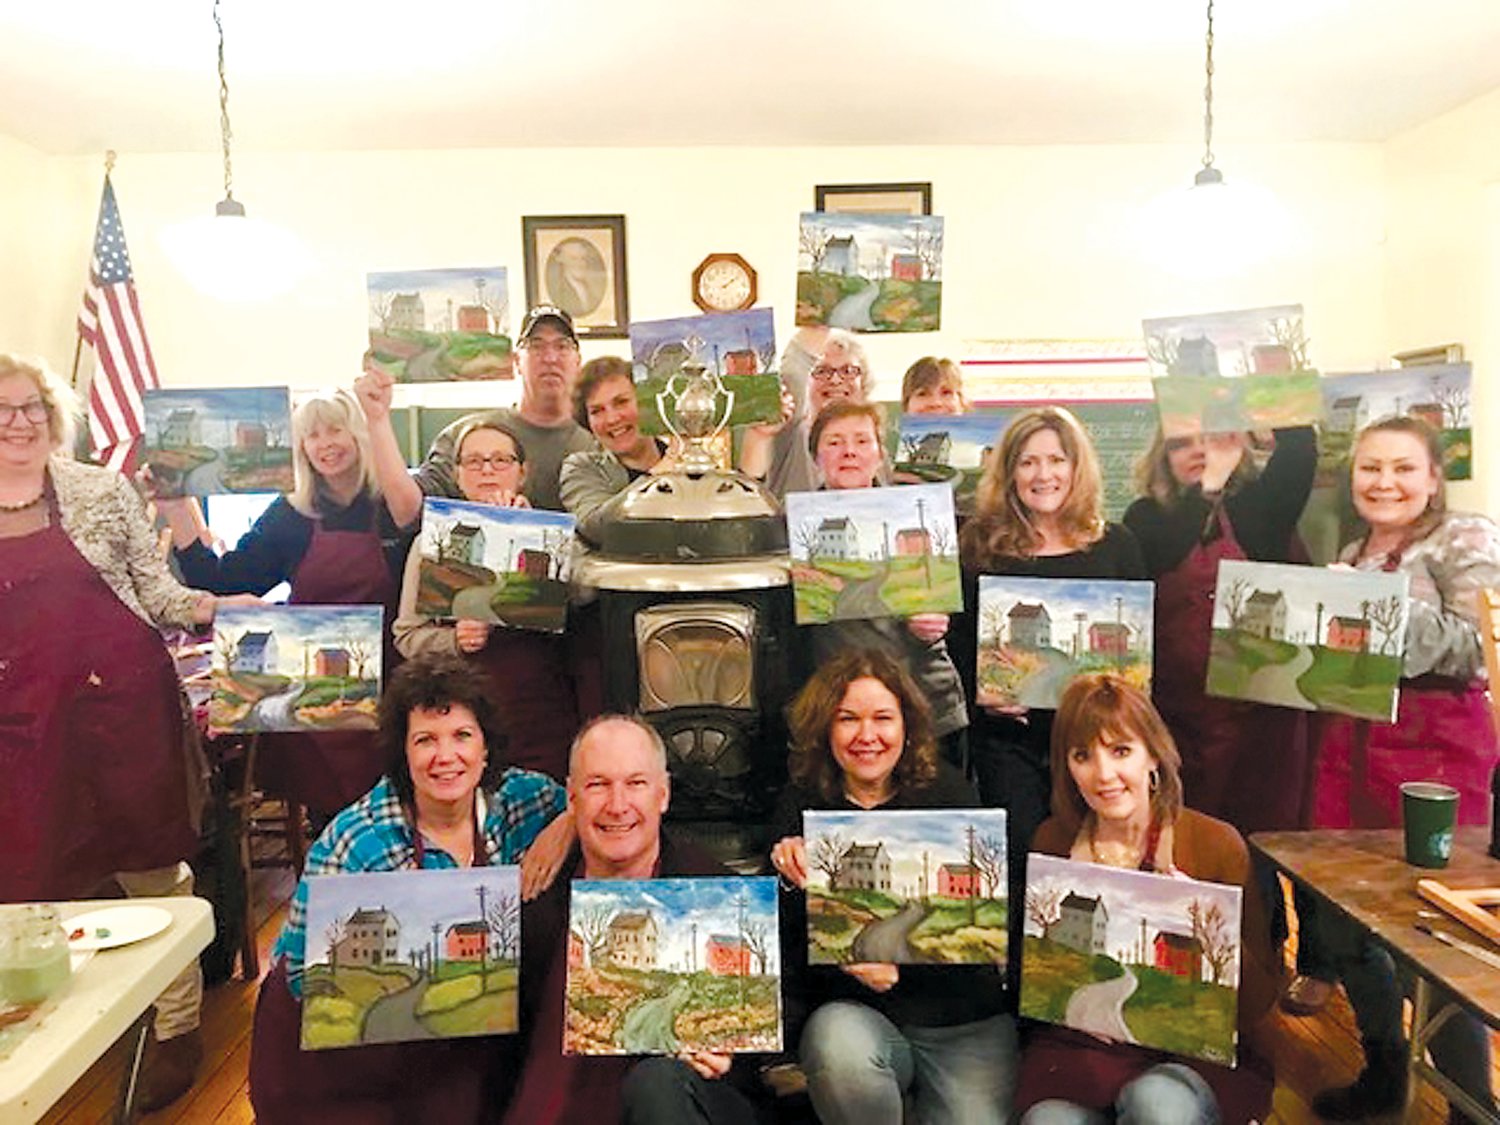 A group photo shows Impression-Sips participants from 2019 with their artwork.